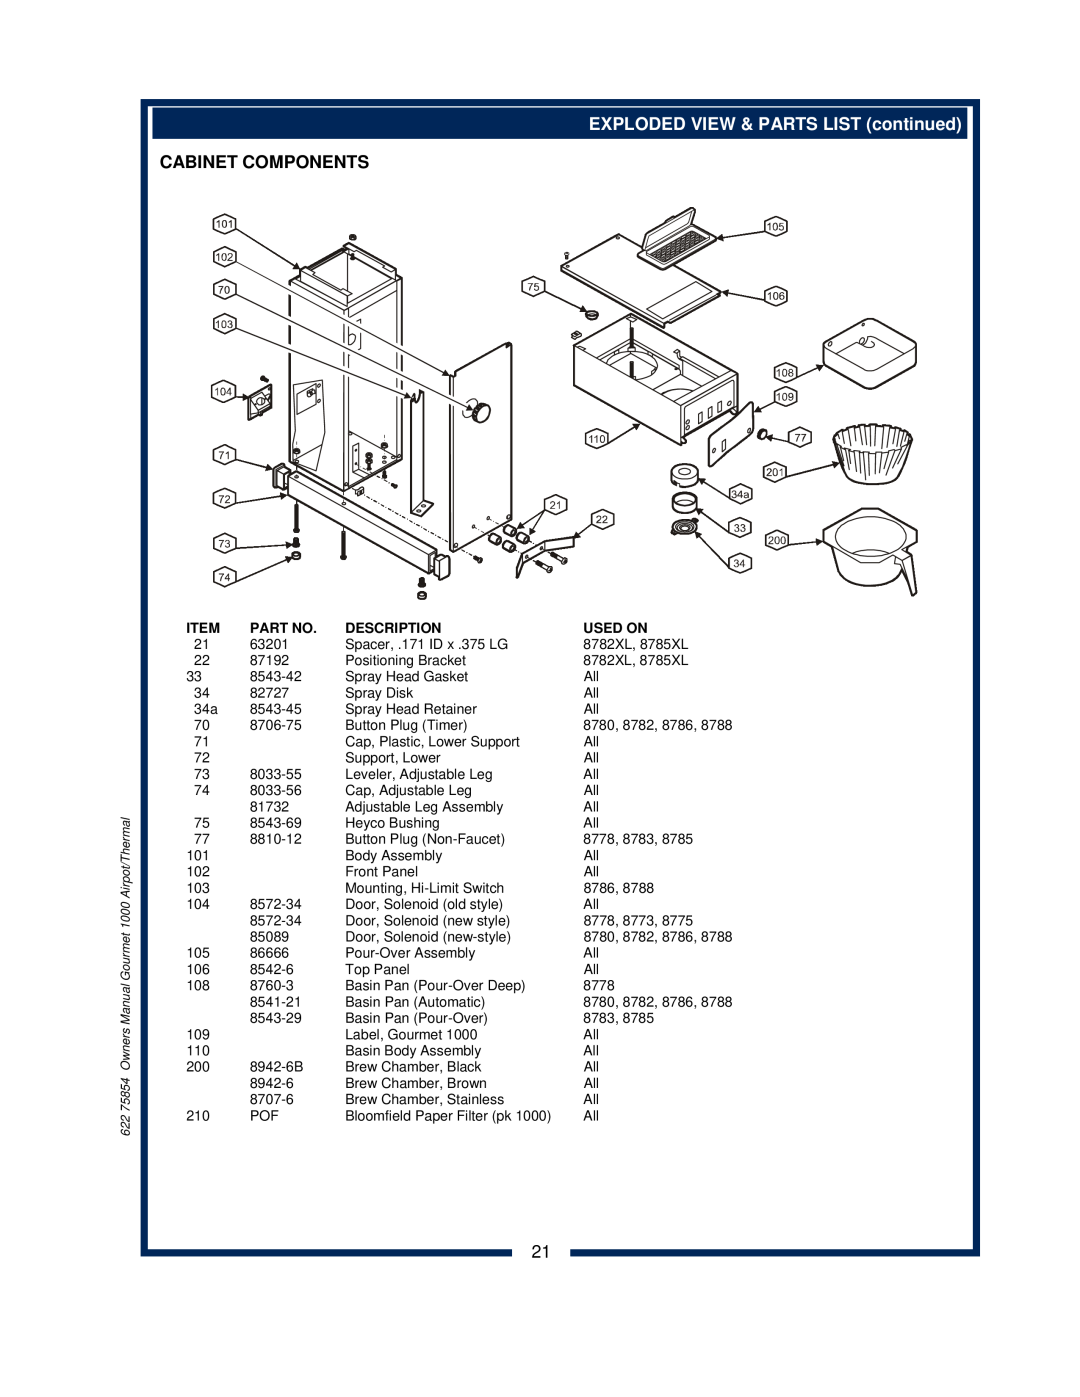 Bloomfield 8778, 8785, 8783, 8786, 8780, 8788 Cabinet Components, EXPLODED VIEW & PARTS LIST continued, Description, Used On 